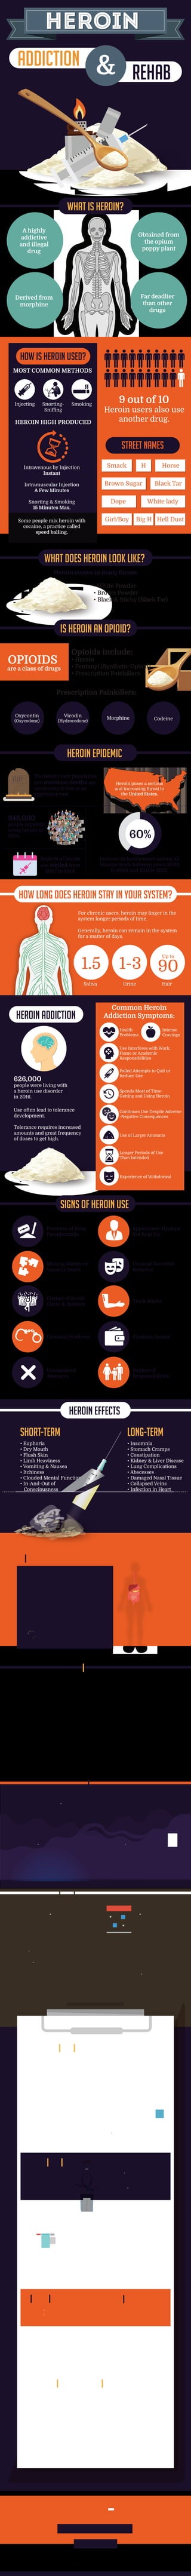 HEROINHEROIN
ADDICTION
REHAB&
WHAT IS HEROIN?
WHAT DOES HEROIN LOOK LIKE?
HOW LONG DOES HEROIN STAY IN YOUR SYSTEM?
IS HEROIN AN OPIOID?
HEROIN EPIDEMIC
A highly
addictive
and illegal
drug
Derived from
morphine
Far deadlier
than other
drugs
Obtained from
the opium
poppy plant
HOW IS HEROIN USED?
STREET NAMES
MOST COMMON METHODS
Heroin comes in many forms:
9 out of 10
Heroin users also use
another drug.HEROIN HIGH PRODUCED
Injecting
Intravenous by Injection
Instant
Intramuscular Injection
A Few Minutes
Snorting & Smoking
15 Minutes Max.
Some people mix heroin with
cocaine, a practice called
speed balling.
Snorting-
Sniﬃng
Smoking
• White Powder
• Brown Powder
• Black & Sticky (Black Tar)
Opioids include:
• Heroin
• Fentanyl (Synthetic Opioid)
• Prescription Painkillers
Prescription Painkillers:
Smack
Dope
Horse
Black TarBrown Sugar
White lady
H
Girl/Boy Hell DustBig H
OPIOIDS
are a class of drugs
Oxycontin
(Oxycodone)
The heroin user population
and overdose deaths are
continuing to rise at an
aggressive rate.
For chronic users, heroin may linger in the
system longer periods of time.
Generally, heroin can remain in the system
for a matter of days.
948,000
people reported
using heroin in
2016.
Increase in heroin users among all
income levels between years 2002
to 2004 and 2011 to 2013.
Reports of heroin
use tripled from
2007 to 2014.
Vicodin
(Hydrocodone)
Morphine Codeine
Heroin poses a serious
and increasing threat to
the United States.
RIP
60%
Saliva
1.5 1-3
Urine
90
Hair
Up to
Use often lead to tolerance
development.
Tolerance requires increased
amounts and great frequency
of doses to get high.
626,000
people were living with
a heroin use disorder
in 2016.
Common Heroin
Addiction Symptoms:Heroin Addiction
SIGNS OF HEROIN USE
HEROIN OVERDOSE
Health
Problems
Intense
Cravings
Use Interferes with Work,
Home or Academic
Responsibilities
Failed Attempts to Quit or
Reduce Use
Spends Most of Time-
Getting and Using Heroin
Continues Use Despite Adverse
-Negative Consequences
Use of Larger Amounts
Longer Periods of Use
Than Intended
Experience of Withdrawal
Presence of Drug
Paraphernalia
Appearance-Hygiene
Not Kept Up
Missing Money or
Valuable Items
Unusual-Secretive
Behavior
Change of Social
Circle & Hobbies
Track Marks
Criminal Problems Financial Issues
Unexplained
Absences
• Euphoria
• Dry Mouth
• Flush Skin
• Limb Heaviness
• Vomiting & Nausea
• Itchiness
• Clouded Mental Function
• In-And-Out of
Consciousness
Aka “Nodding Out”
• Insomnia
• Stomach Cramps
• Constipation
• Kidney & Liver Disease
• Lung Complications
• Abscesses
• Damaged Nasal Tissue
• Collapsed Veins
• Infection in Heart
Valves and Lining
• Mental Disorders
• Menstrual Irregularity
• Sexual Dysfunction
• Death by Accident,
Violence or Suicide
Neglect of
Responsibilities
HEROIN EFFECTS
SHORT-TERM
Injection drug use related infectious
diseases:
Heroin overdose is extremely dangerous and often results in:
Additives can lead to
permanent damage of:
Heroin containing additives,
such as starch or sugar is
known to clog blood vessels.
RISKS
LONG-TERM
HIV Hepatitis
Lungs
Liver
Kidneys
Brain
Slow
Breathing
Unresponsiveness Respiratory
Failure
Bluish Skin Due
to Poor Circulation
Varied Mental
Eﬀects
Nervous System
Damage
Permanent Brain
Damage
Coma & Death
HEROIN DEATHS
From 2002-2013,
Heroin overdose deaths
quadrupled.
In 2013, U.S. states reported
a spike in overdose deaths
from fentanyl- laced heroin.
Fentanyl is more powerful
than heroin and will cause
even long-time users to
overdose.
Heroin overdose deaths
are increasing in many
cities and counties
across the U.S.
HEROIN WITHDRAWAL SYMPTOMS
3-4
Days After Use
Symptoms Peak
6-8
Hours After Last Use
Withdrawal Begins
When addicted to heroin stopping use causes severe withdrawals.
• Flu-like symptoms
• Restlessness
• Bone-Muscle Pain
• Sleep Disturbances
• Panic
• Insomnia
• Tremors
• Stomach Pain
• Vomiting
• Diarrhea
• Hot-Cold Flashes
• Strong Cravings
HEROIN WITHDRAWAL SYMPTOMS
HEROIN REHAB DURING PREGNANCY
More people seek treatment for heroin
addiction than for any other illicit drug.
In 2011:
300,000
people received
medication-assisted
treatment for opioid
addiction.
306,000
received methadone
at opioid treatment
centers.
51%
of opioid treatment
centers oﬀered
buprenorphine.
In 2016:
43%
attended support groups
• Narcotics Anonymous
• Heroin Anonymous
23%
received treatment
at an inpatient rehab
• Untreated heroin addiction during pregnancy can be
devastating for unborn babies.
• Methadone and buprenorphine are used in treatment
of pregnant women.
Beneﬁts:
MEDICATIONS
• Buprenorphine
• Methadone
• Naltrexone
THERAPY METHODS
• Cognitive-Behavioral Therapy
(CBT)
• Contingency Management
• Individual – Group
Counseling
INPATIENT
• Short-term Residential
• Long-term Residential
• Partial Hospitalization
OUTPATIENT
• Intensive Day Treatment
• Individual & Group Counseling
• Support Groups
HEROIN DRUG REHAB
• Heroin is extremely diﬃcult to quit, and rehab is
essential for recovery.
• Treatment portions of rehab begin after
detoxiﬁcation.
26%
of rehab admits identify heroin as their primary
drug of abuse (SAMHSA, 2015).
• Stabilized fetal opioid levels
• Reduced prenatal withdrawal
• Link to treatment for infectious diseases
• Decrease risk of transmission to unborn baby
• Quality prenatal care
https://www.cdc.gov/vitalsigns/heroin/index.html
https://www.dea.gov/resource-center/2016%20NDTA%20Summary.pdf
https://www.dea.gov/divisions/hq/2016/hq062716_attach.pdf
https://www.drugabuse.gov/publications/treating-opioid-use-disorder-during-pregnancy/treating-opioid-use-disorder-during-pregnancy
https://www.samhsa.gov/data/sites/default/ﬁles/NSDUH-FFR1-2016/NSDUH-FFR1-2016.htm
FIND REHAB CENTERS
(877) 322-2450
FINDREHABCENTERS.ORG
Resources:
 